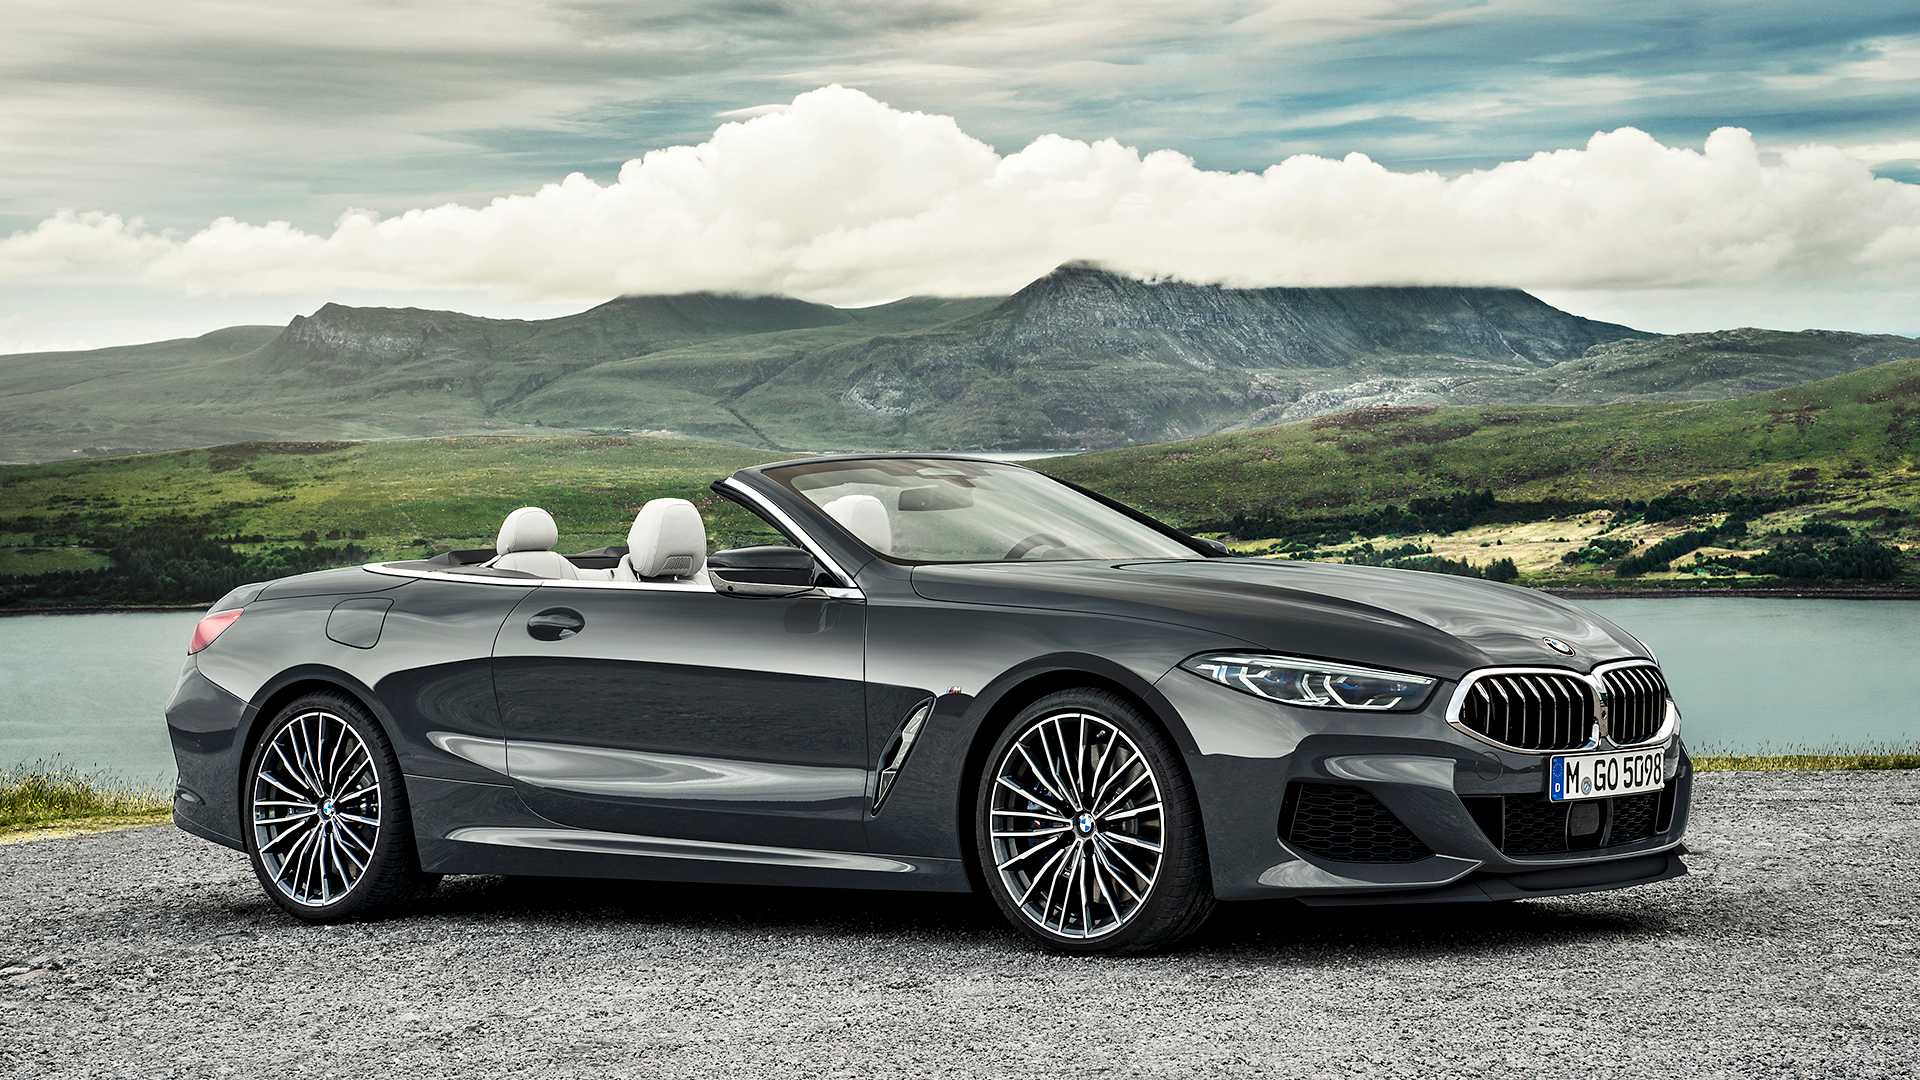 BMW 8 Series Convertible Loses Its Roof, Still Looks Lovely